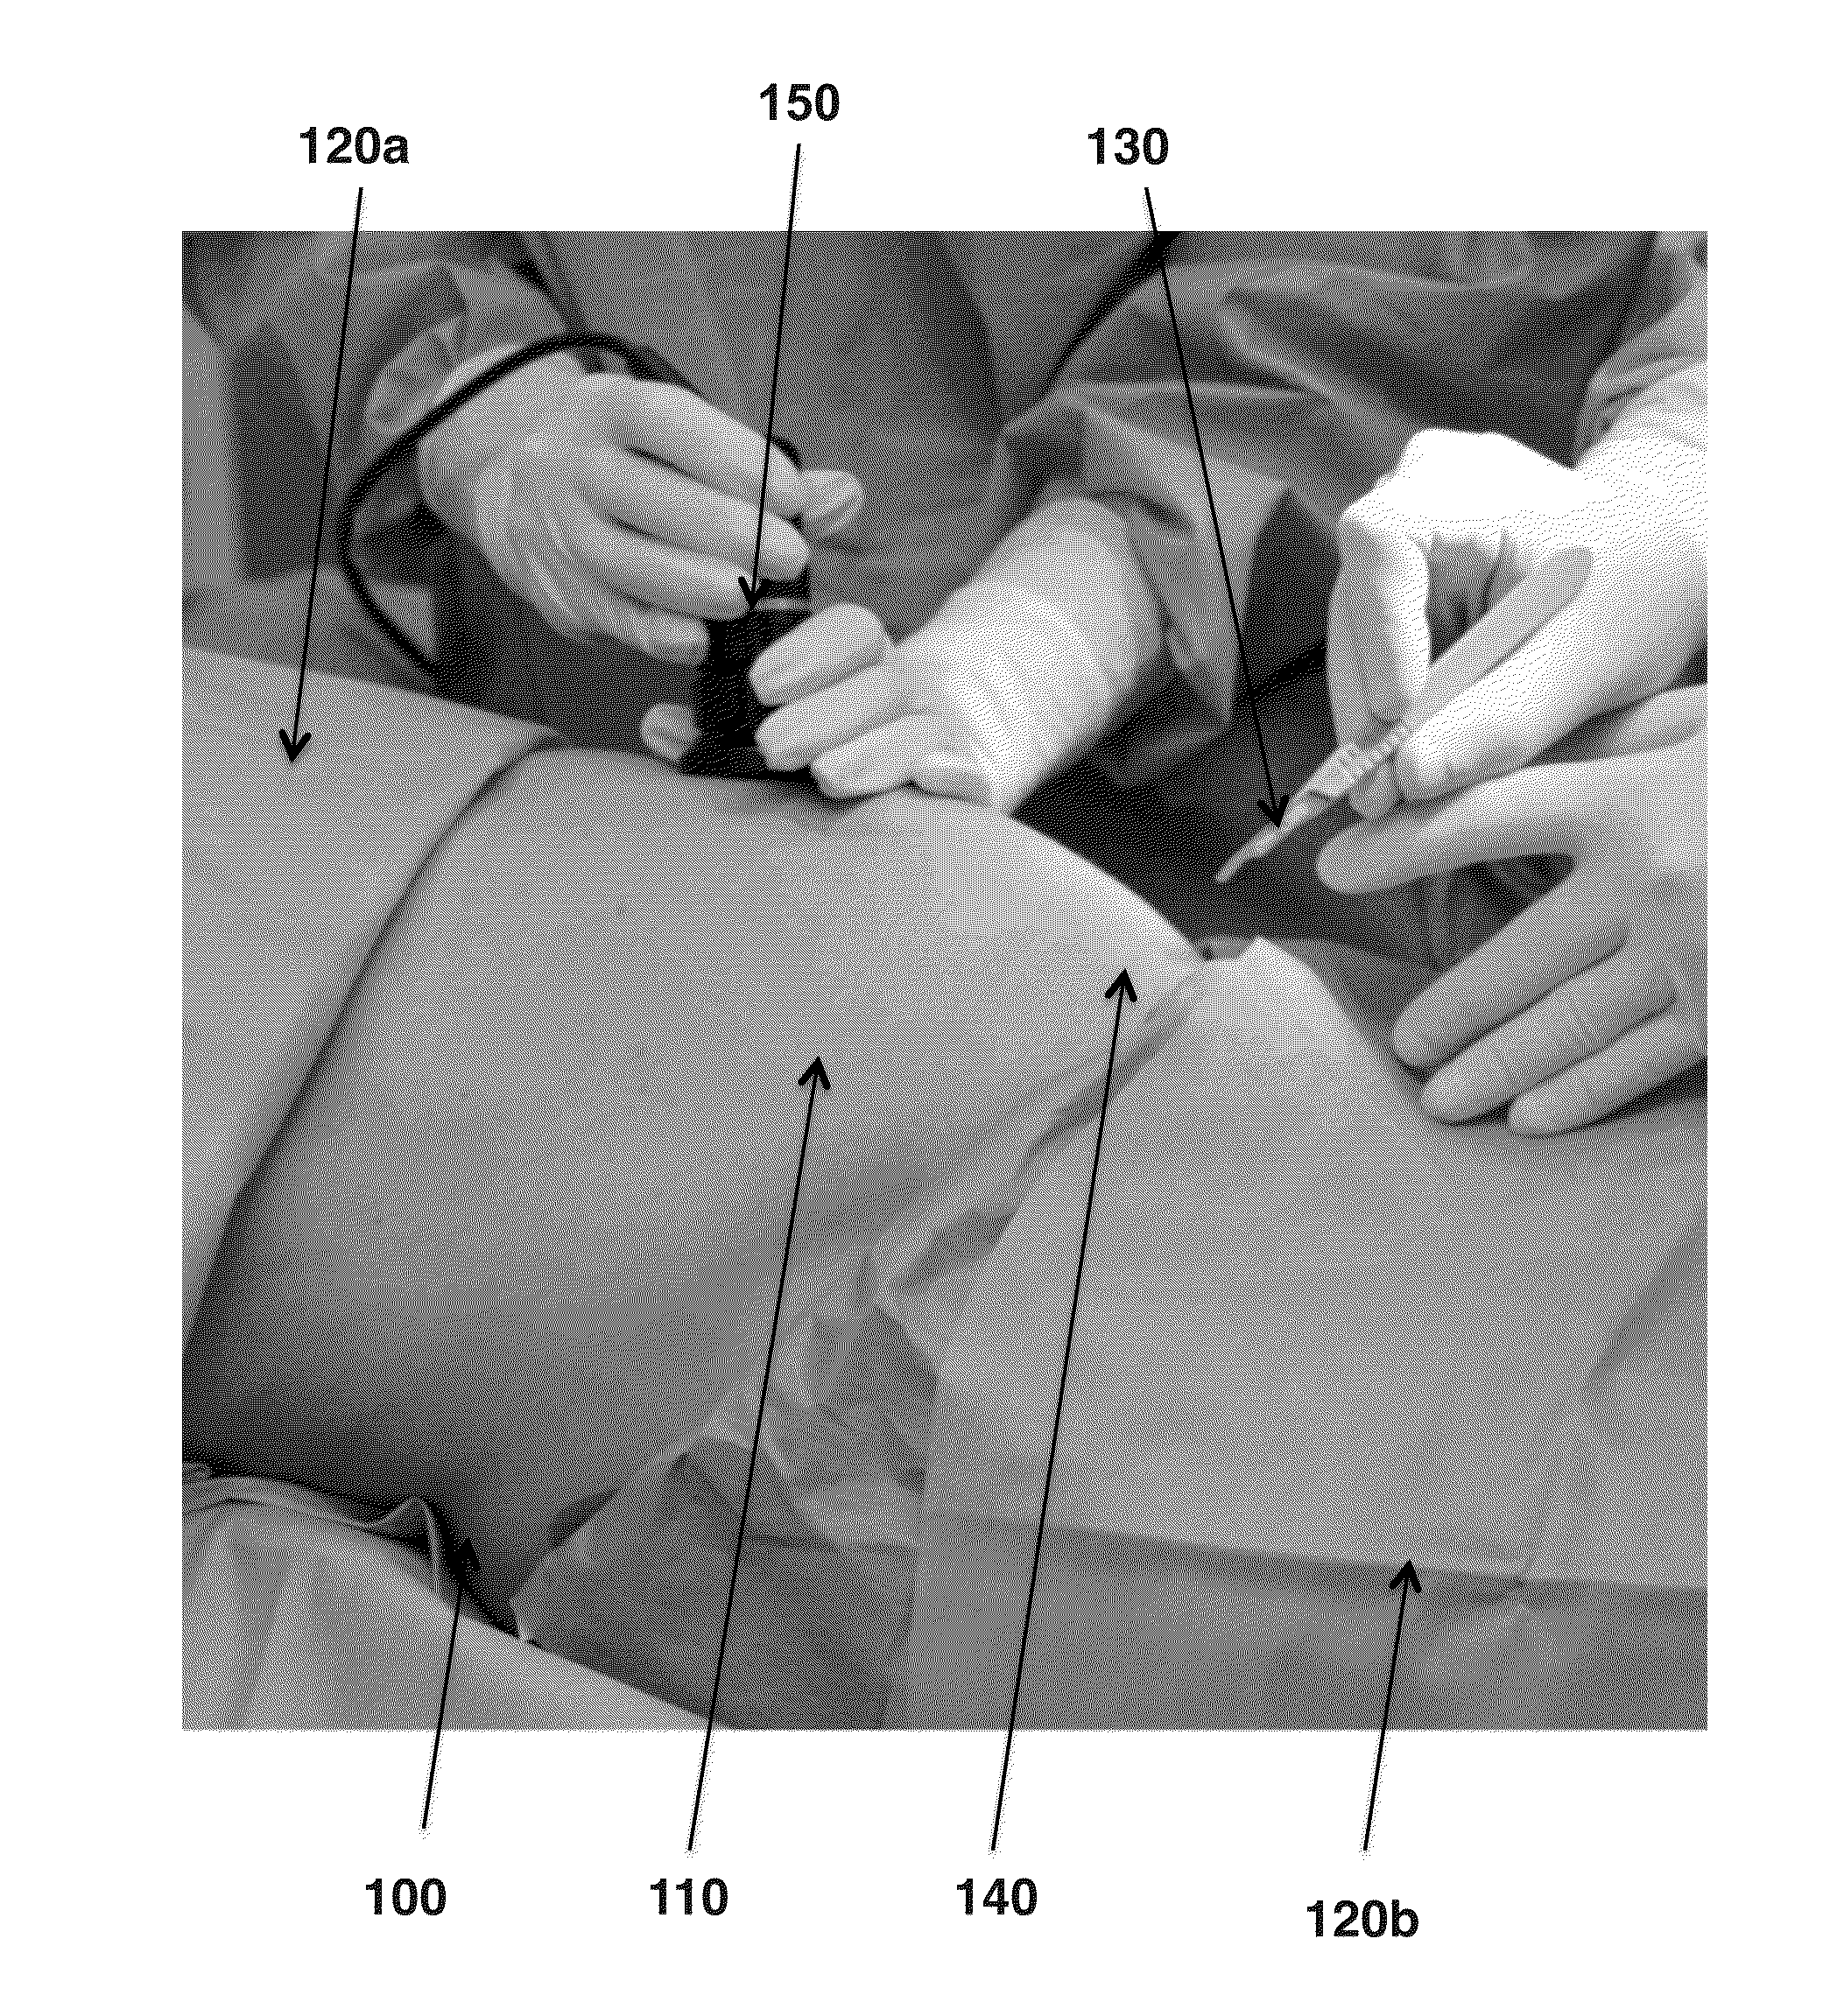 Method for Obtaining Sterile Human Amniotic Fluid and Uses Thereof